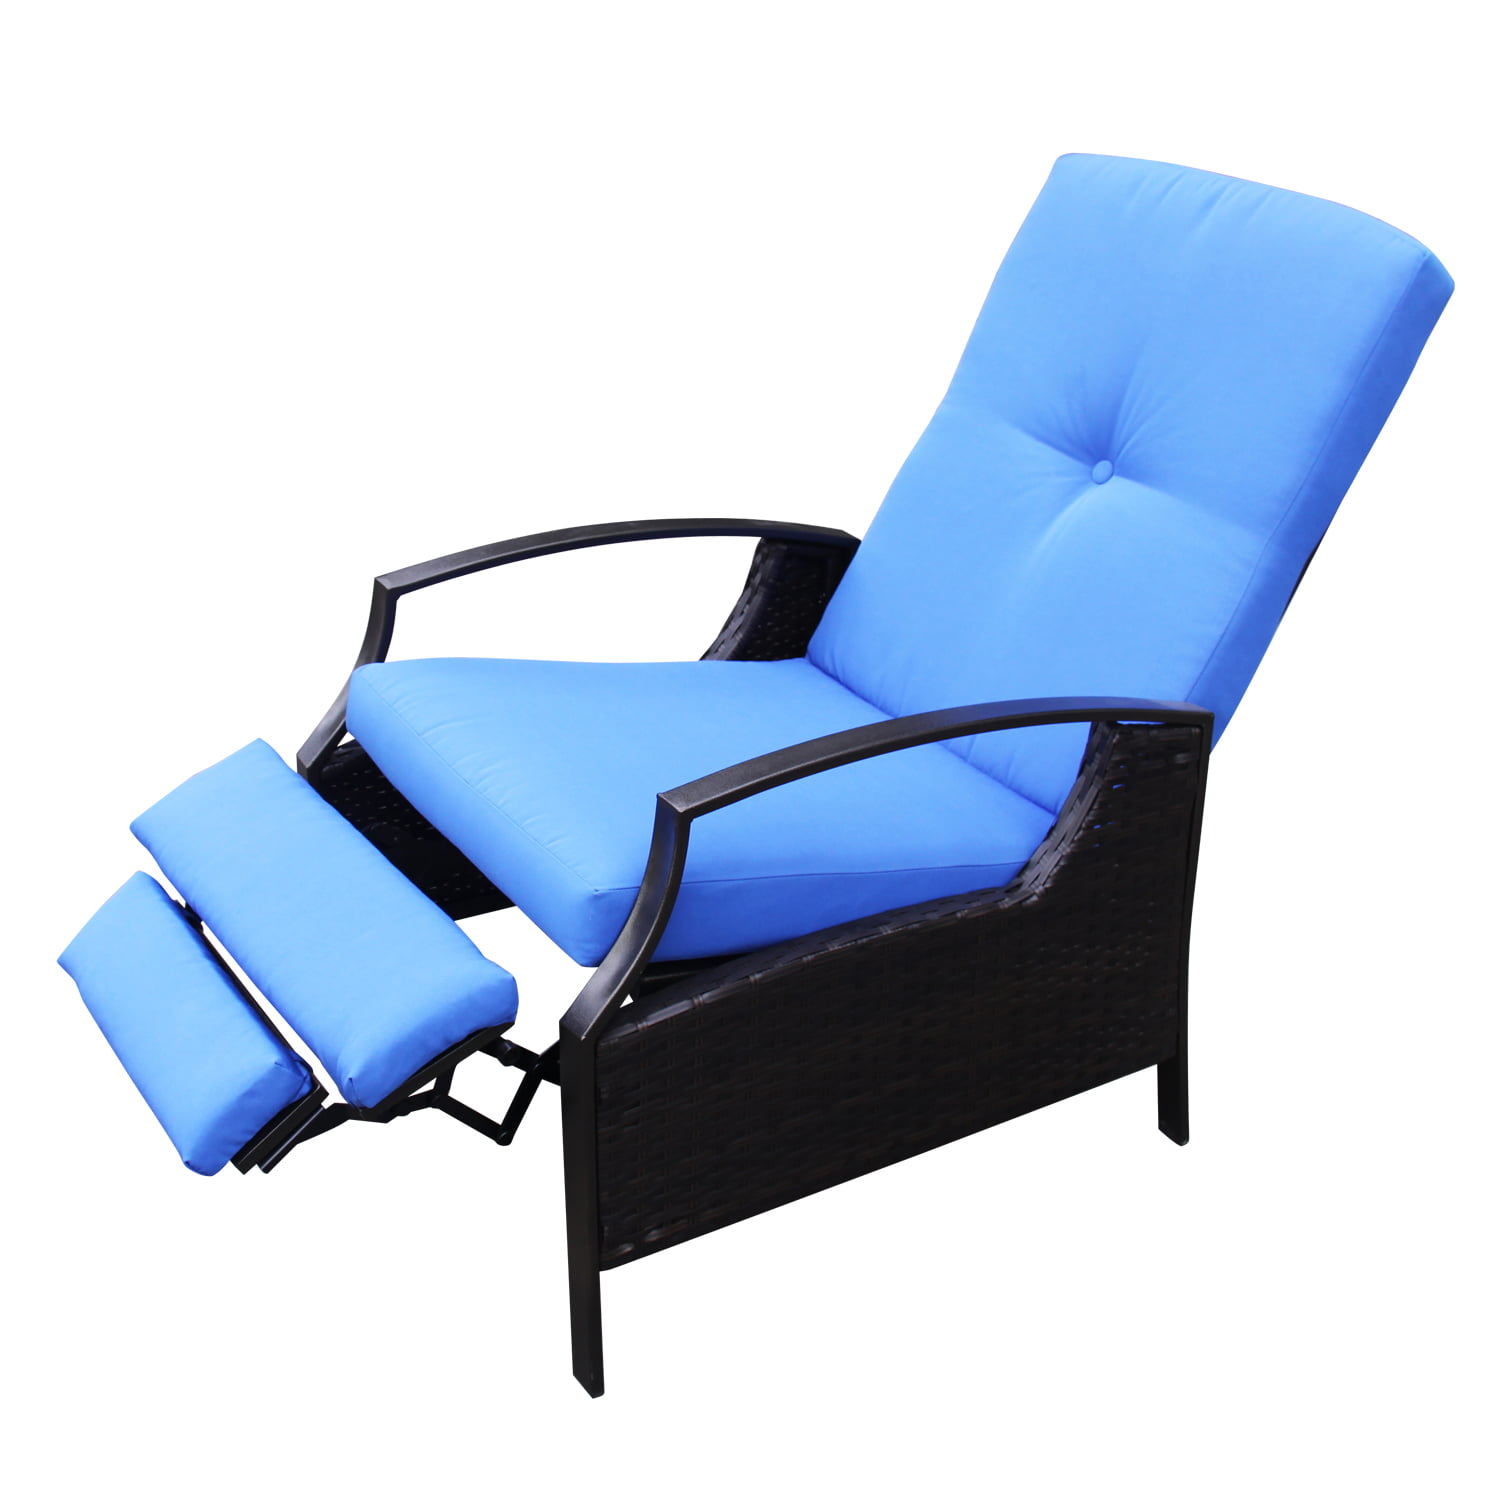 Outsunny Outdoor Rattan Recliner Chair, Outsunny Outdoor Rattan Recliner Chair Replacement Cushions